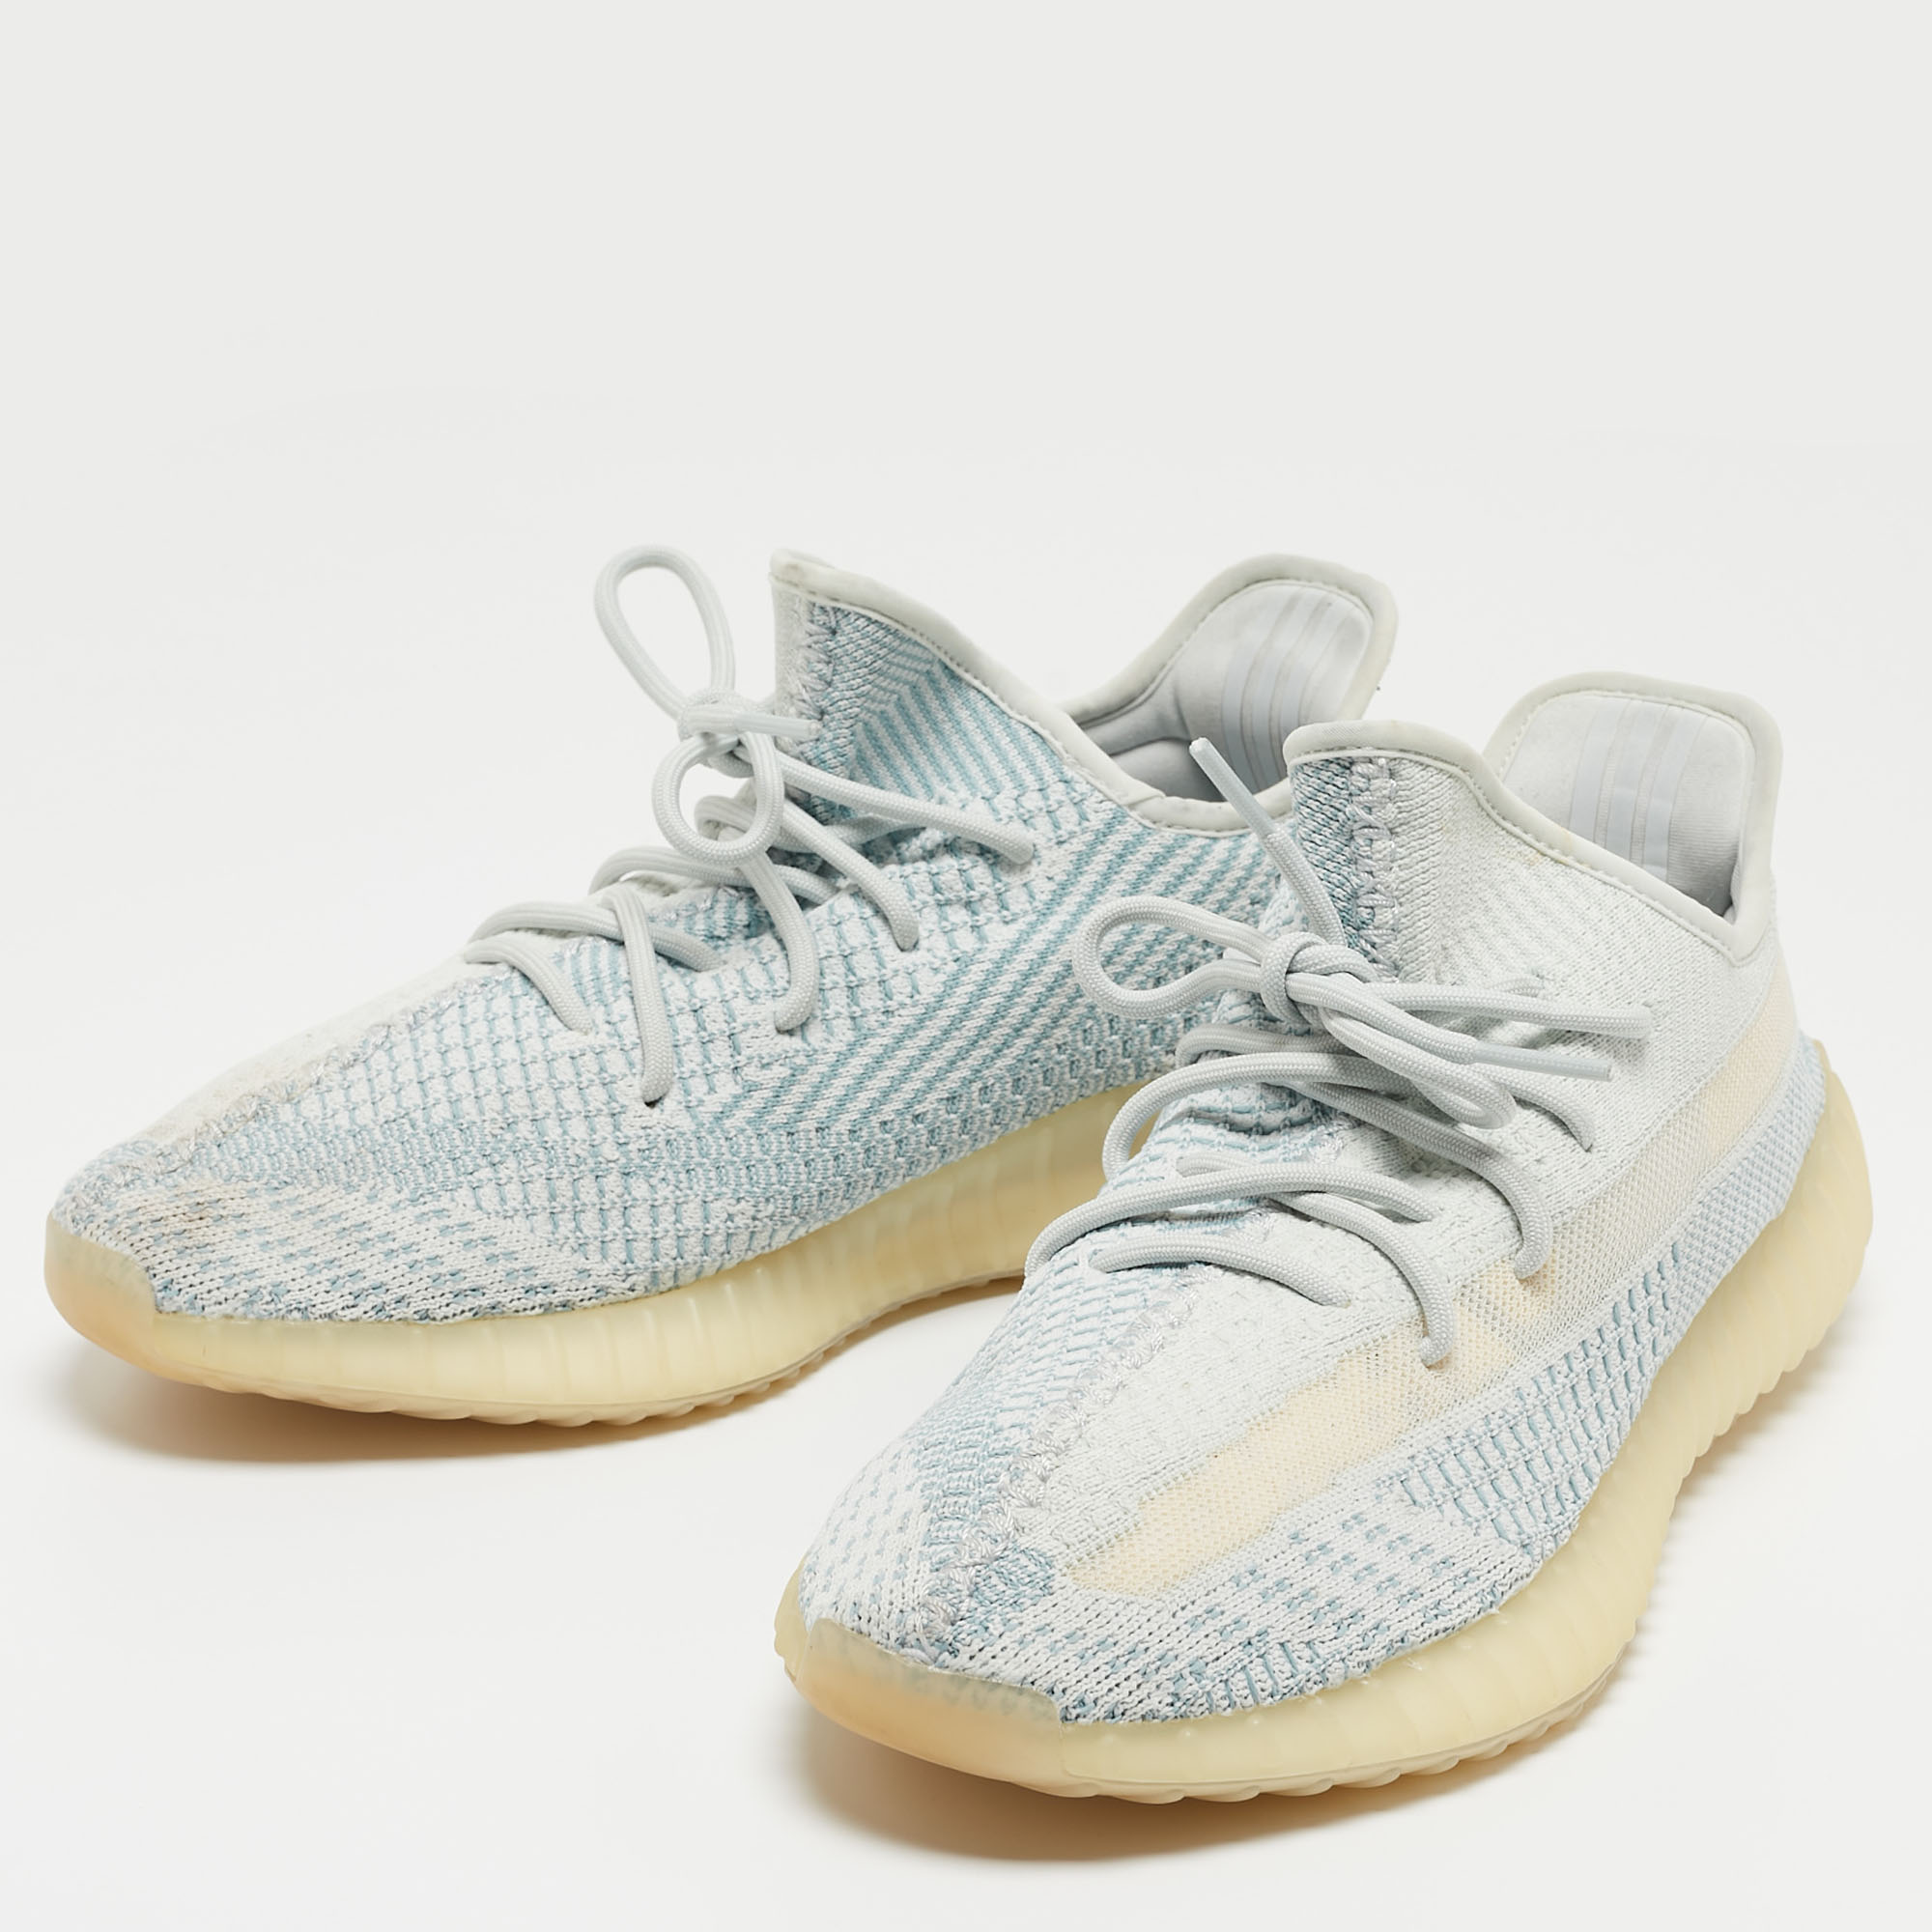 

Yeezy x Adidas Blue/White Knit Fabric Boost 350 V2 Cloud White Non Reflective Sneakers Size  1/3